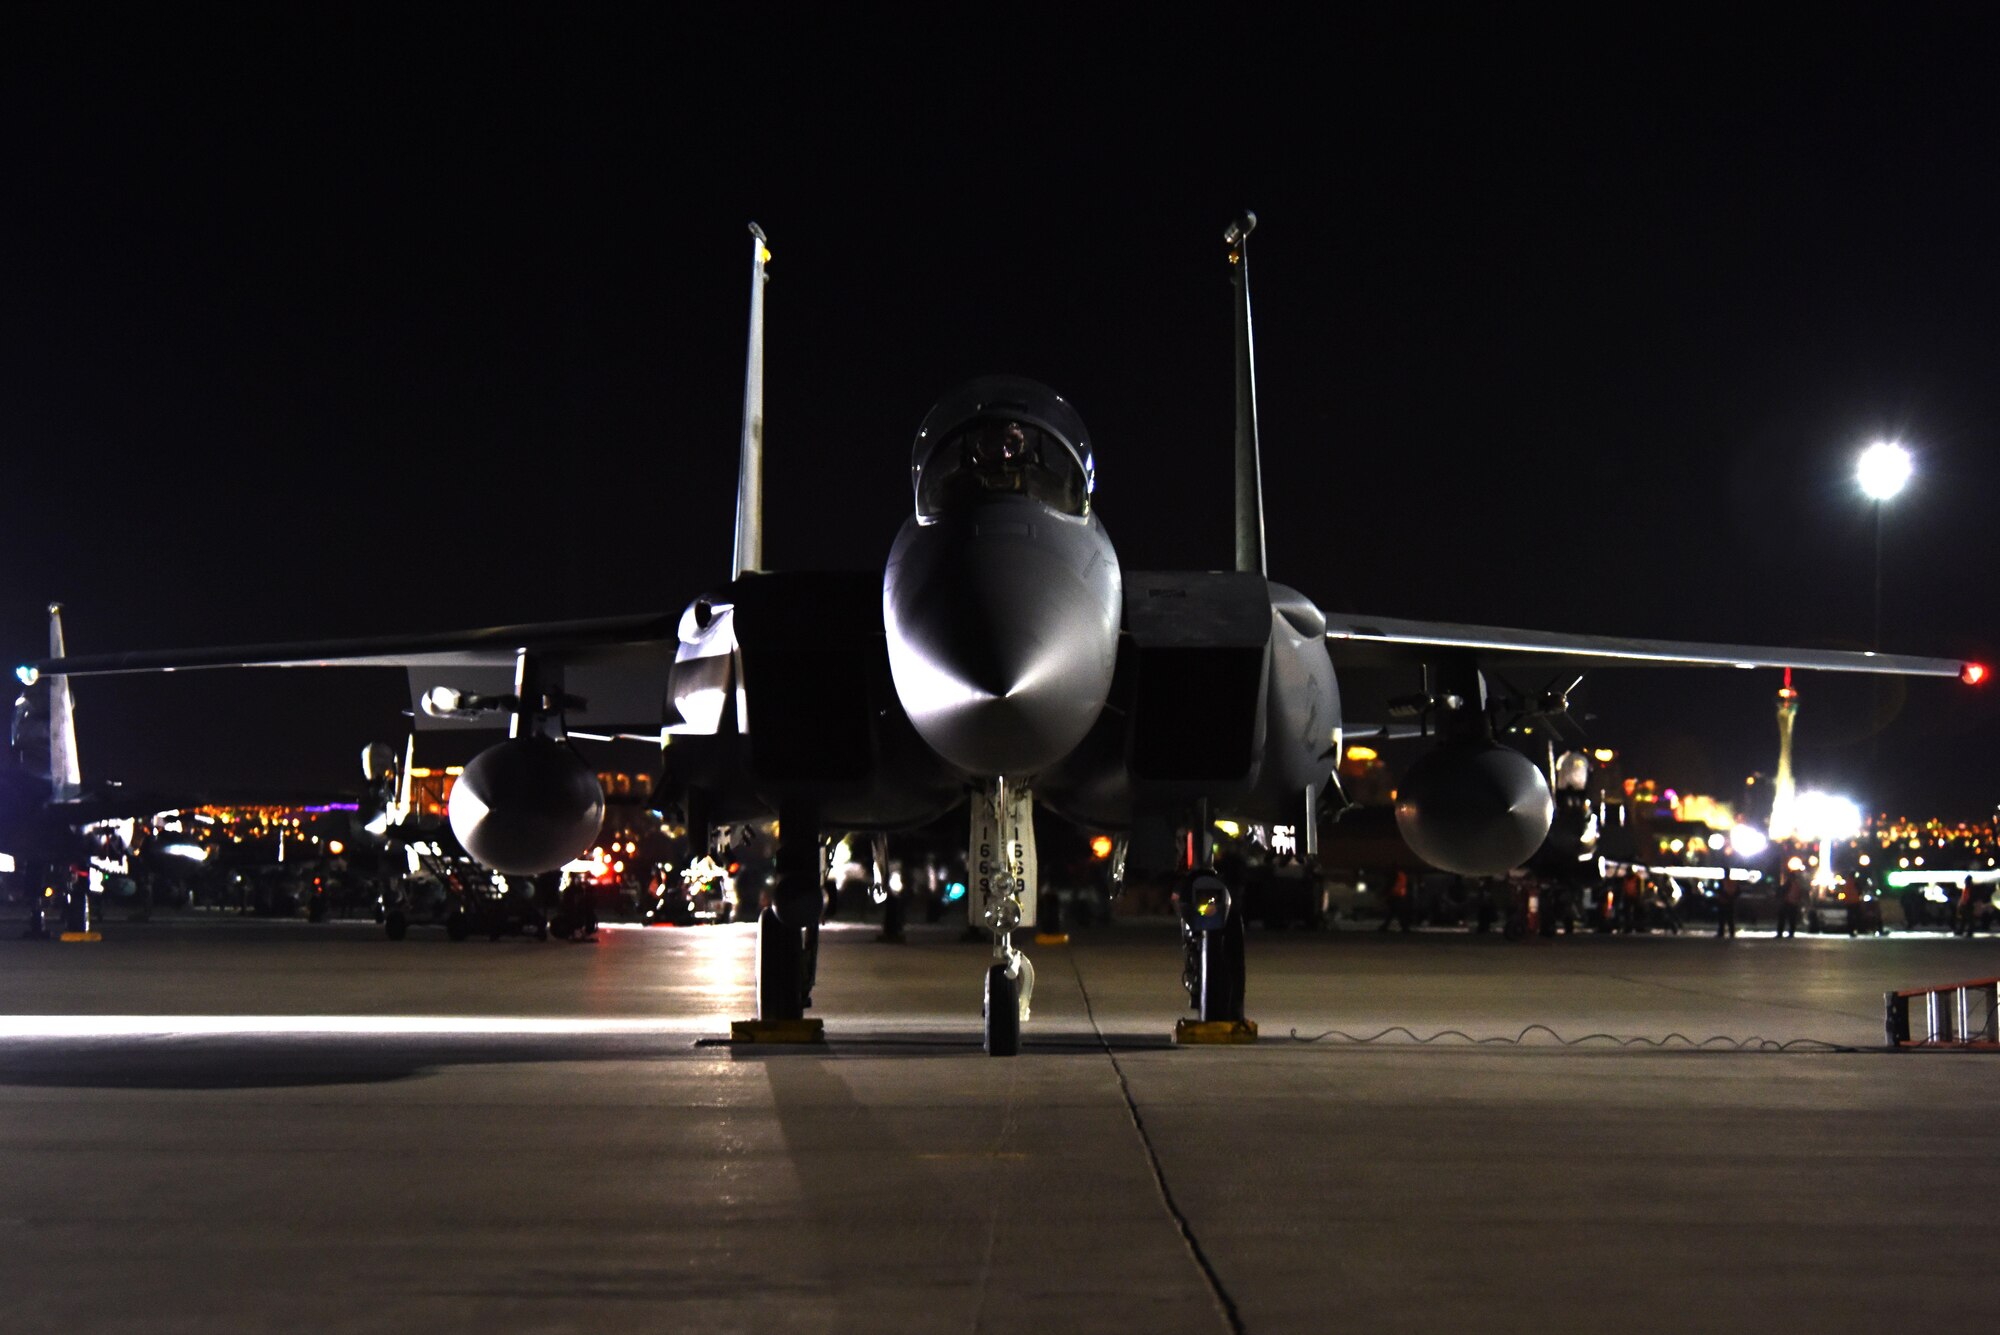 Lt. Col. Lucas Teel, 336th Fighter Squadron commander, readies an F-15E Strike Eagle for a mission during Red Flag 16-2, March 9, 2016, at Nellis Air Force Base, Nevada. Teel and other Strike Eagle aircrew and maintainers participated in the two-week, large-force exercise to enhance warfighting skills along with joint and allied interoperability. (U.S. Air Force photo/Staff Sgt. Chuck Broadway)